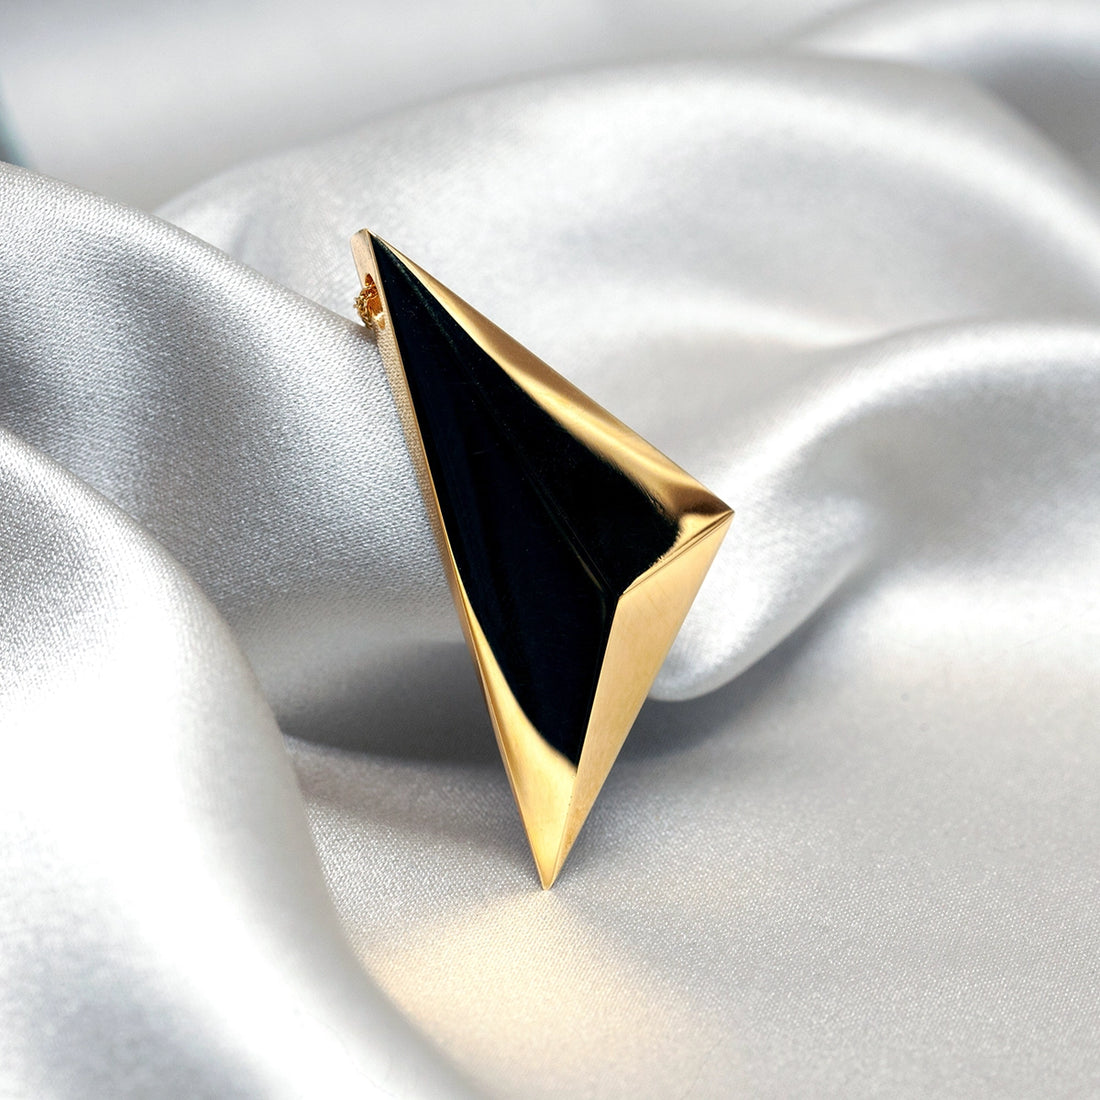 Froint view of vermeil gold pyramidal bold vermeil gold pendant montreal made in canada edgy jewelry silver gold plated unisexe big bold pendant yellow gold sharp look fine custom made jewelry designer montreal little italy jeweler custom bridal and fashion luxury jewelry specialist